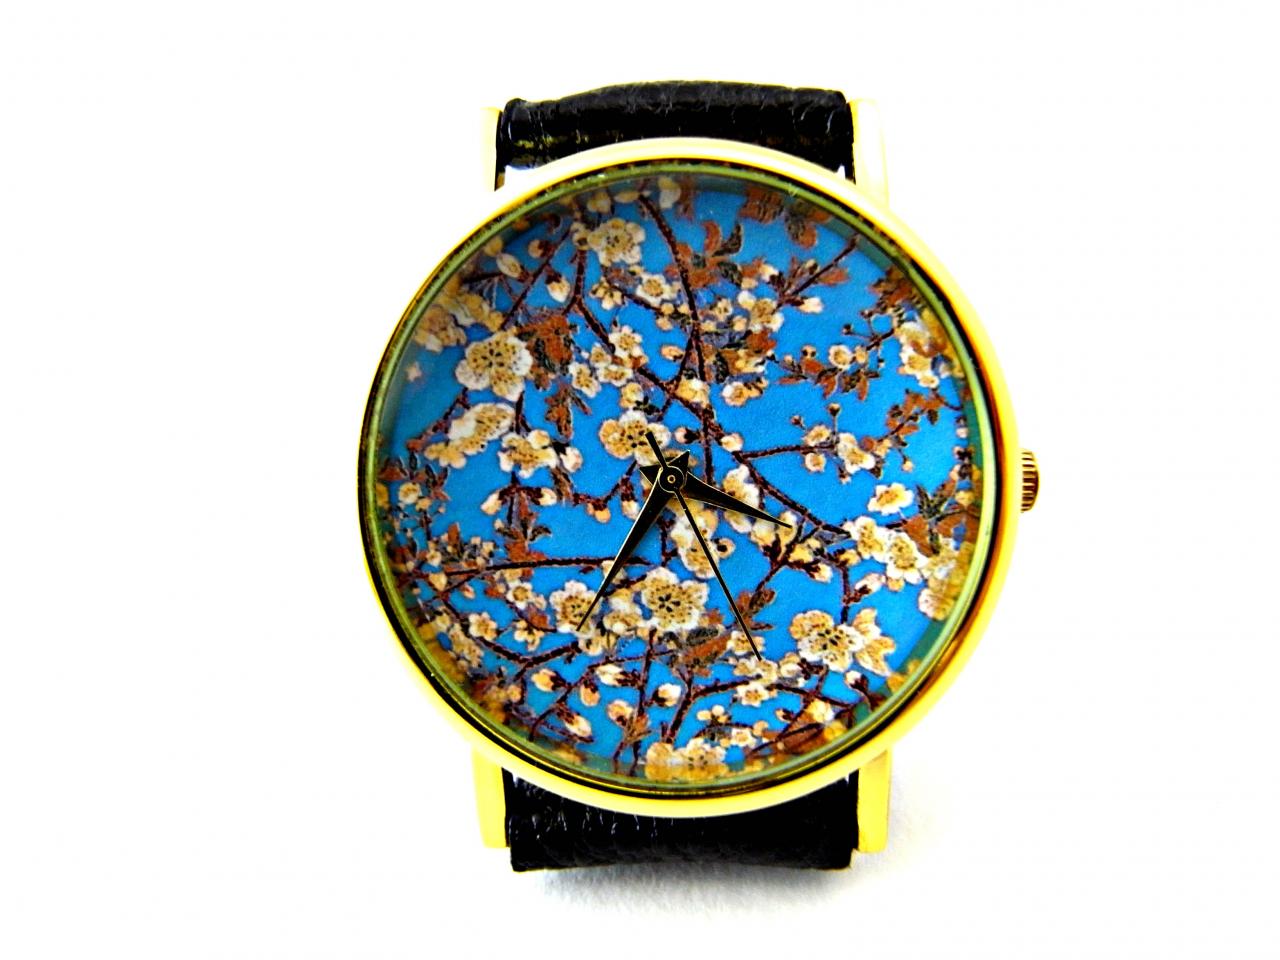 Cherry Blossoms Leather Wrist Watch, Floral Watch, Woman Man Lady Unisex Watch, Genuine Leather Handmade Unique Watch #79